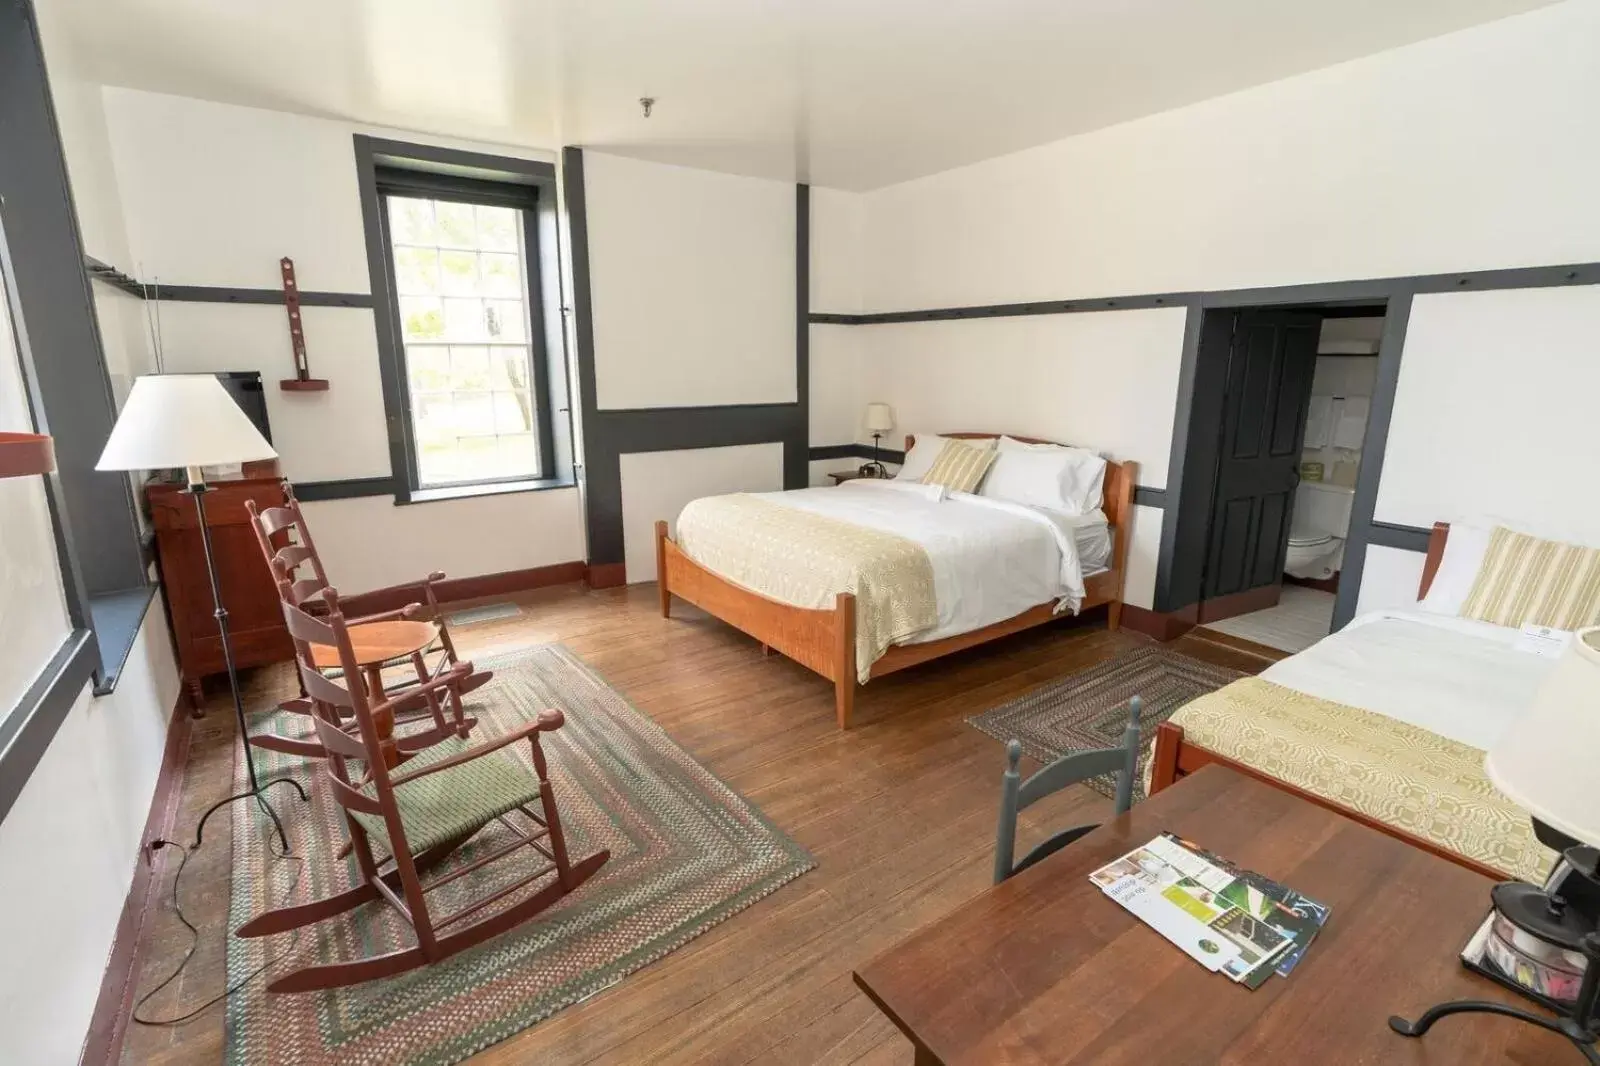 Deluxe Room in Shaker Village of Pleasant Hill